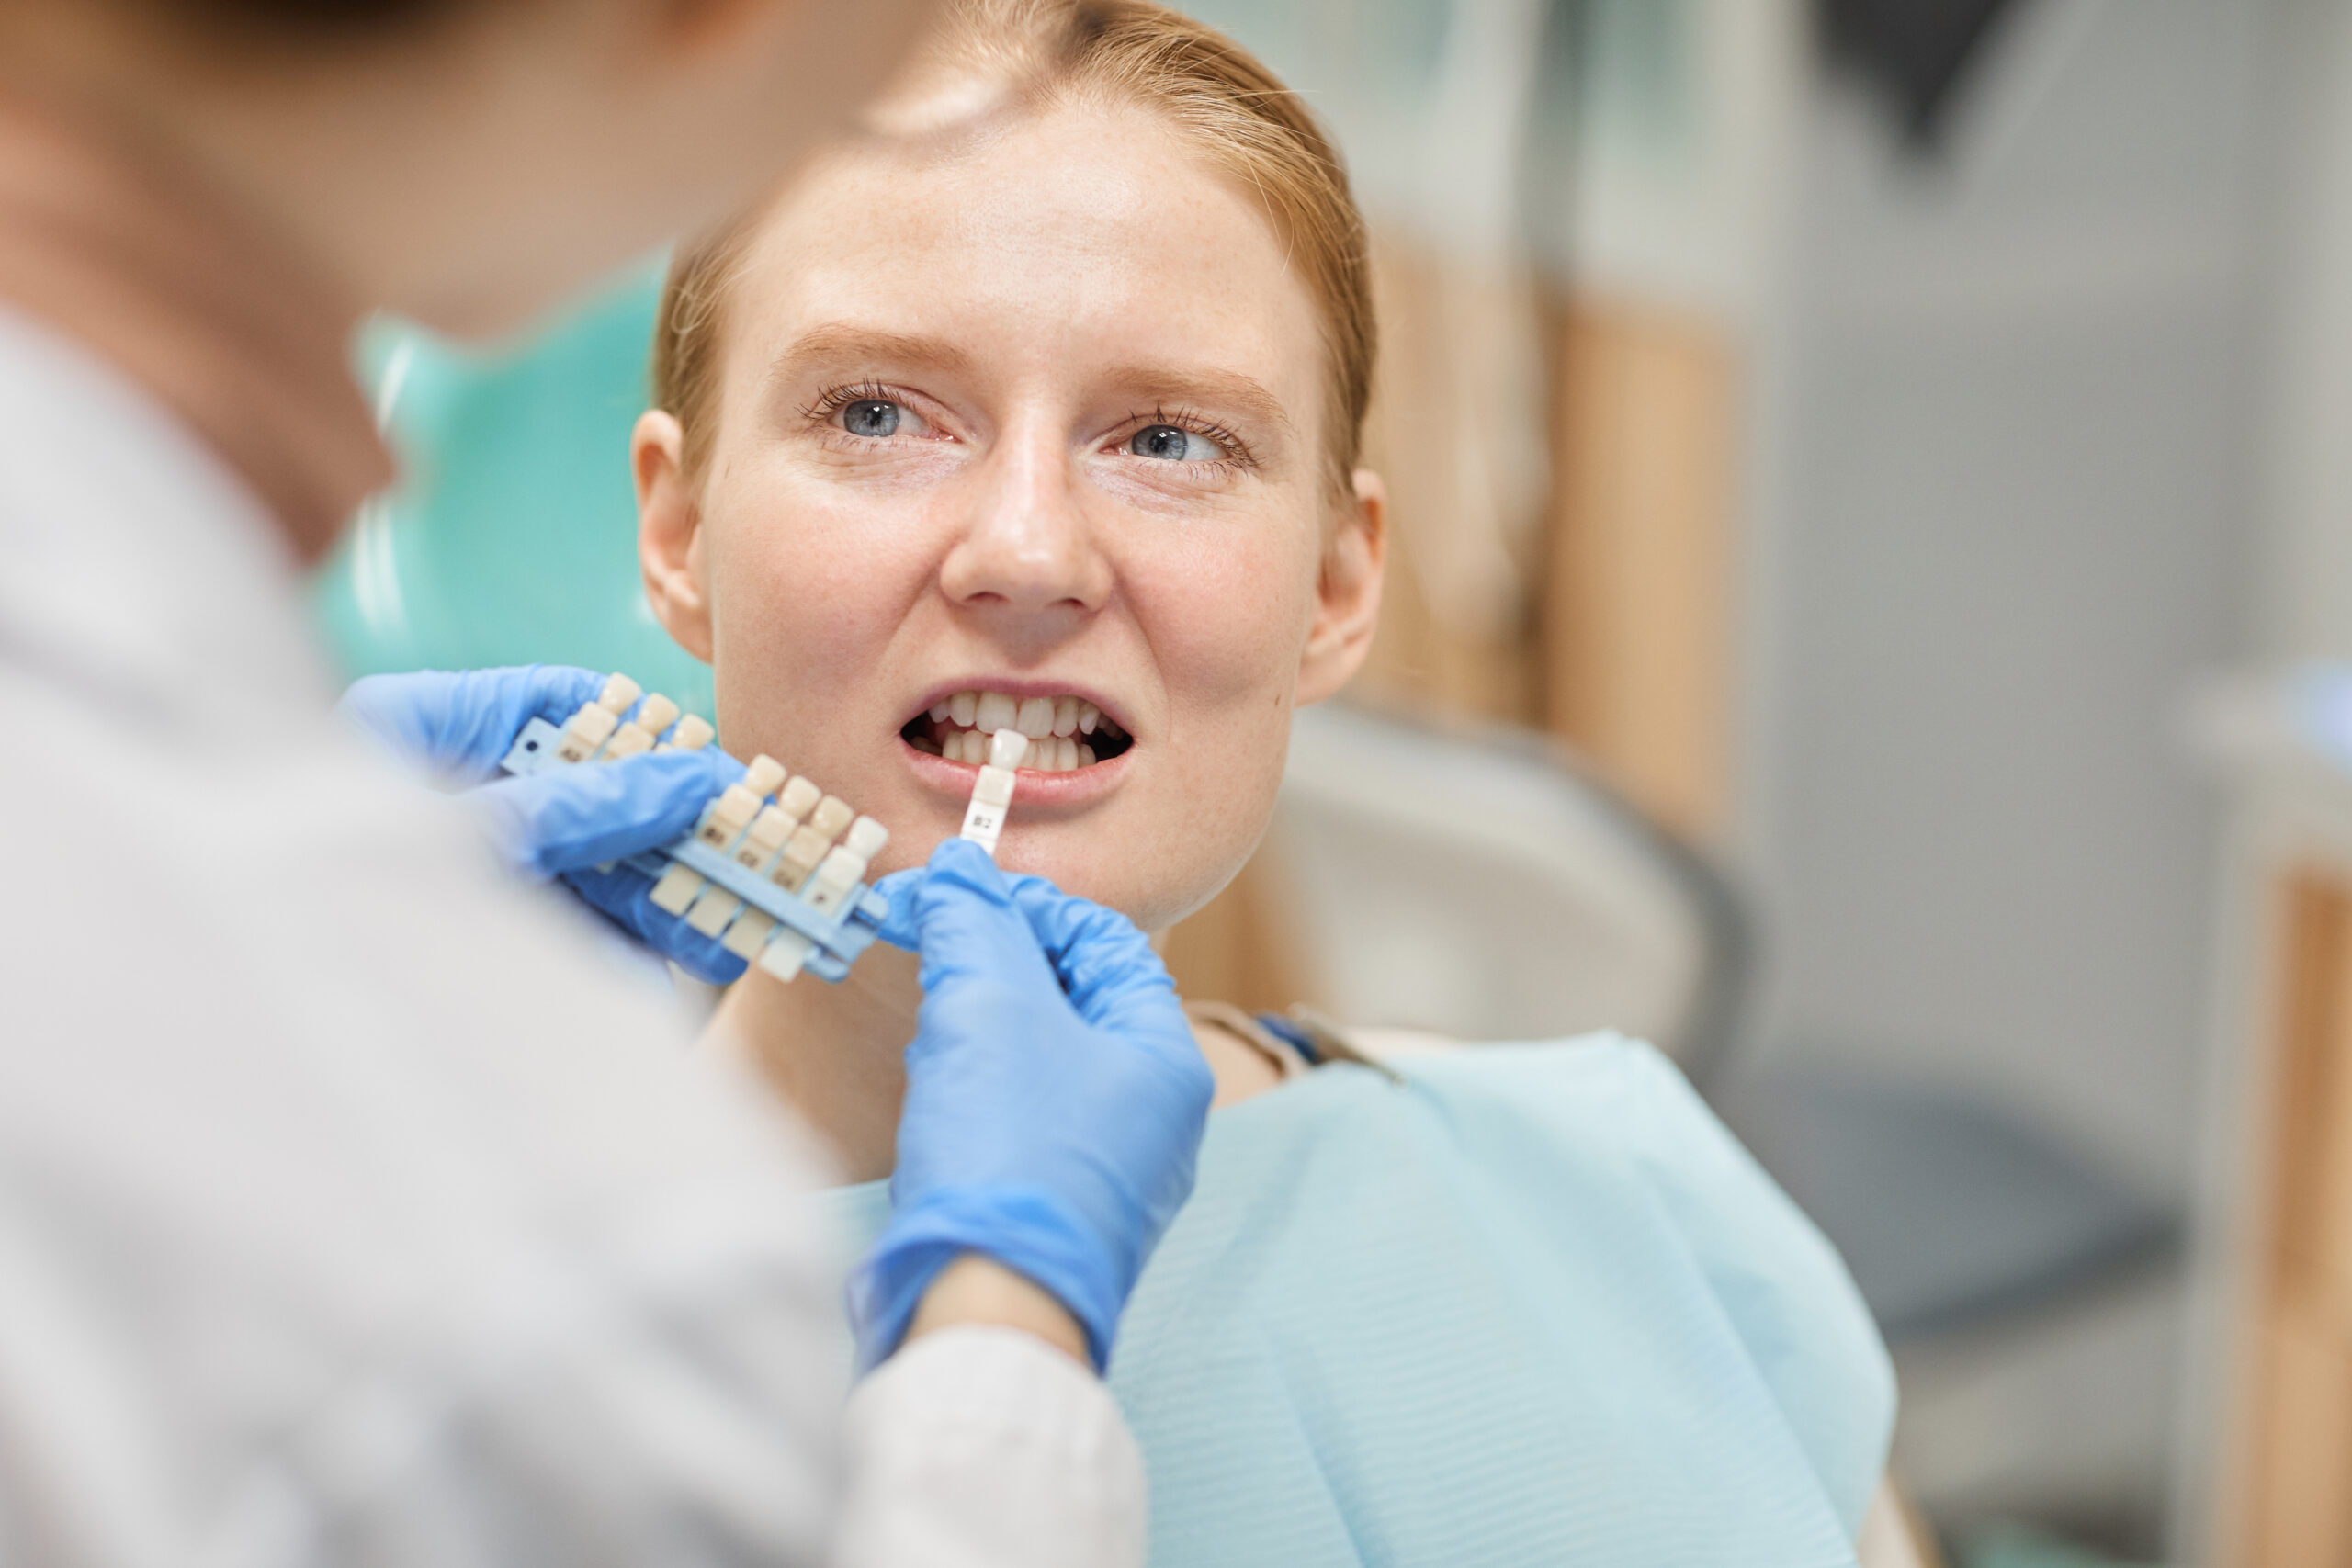 HOW TO AVOID DENTAL CROWN PROBLEMS